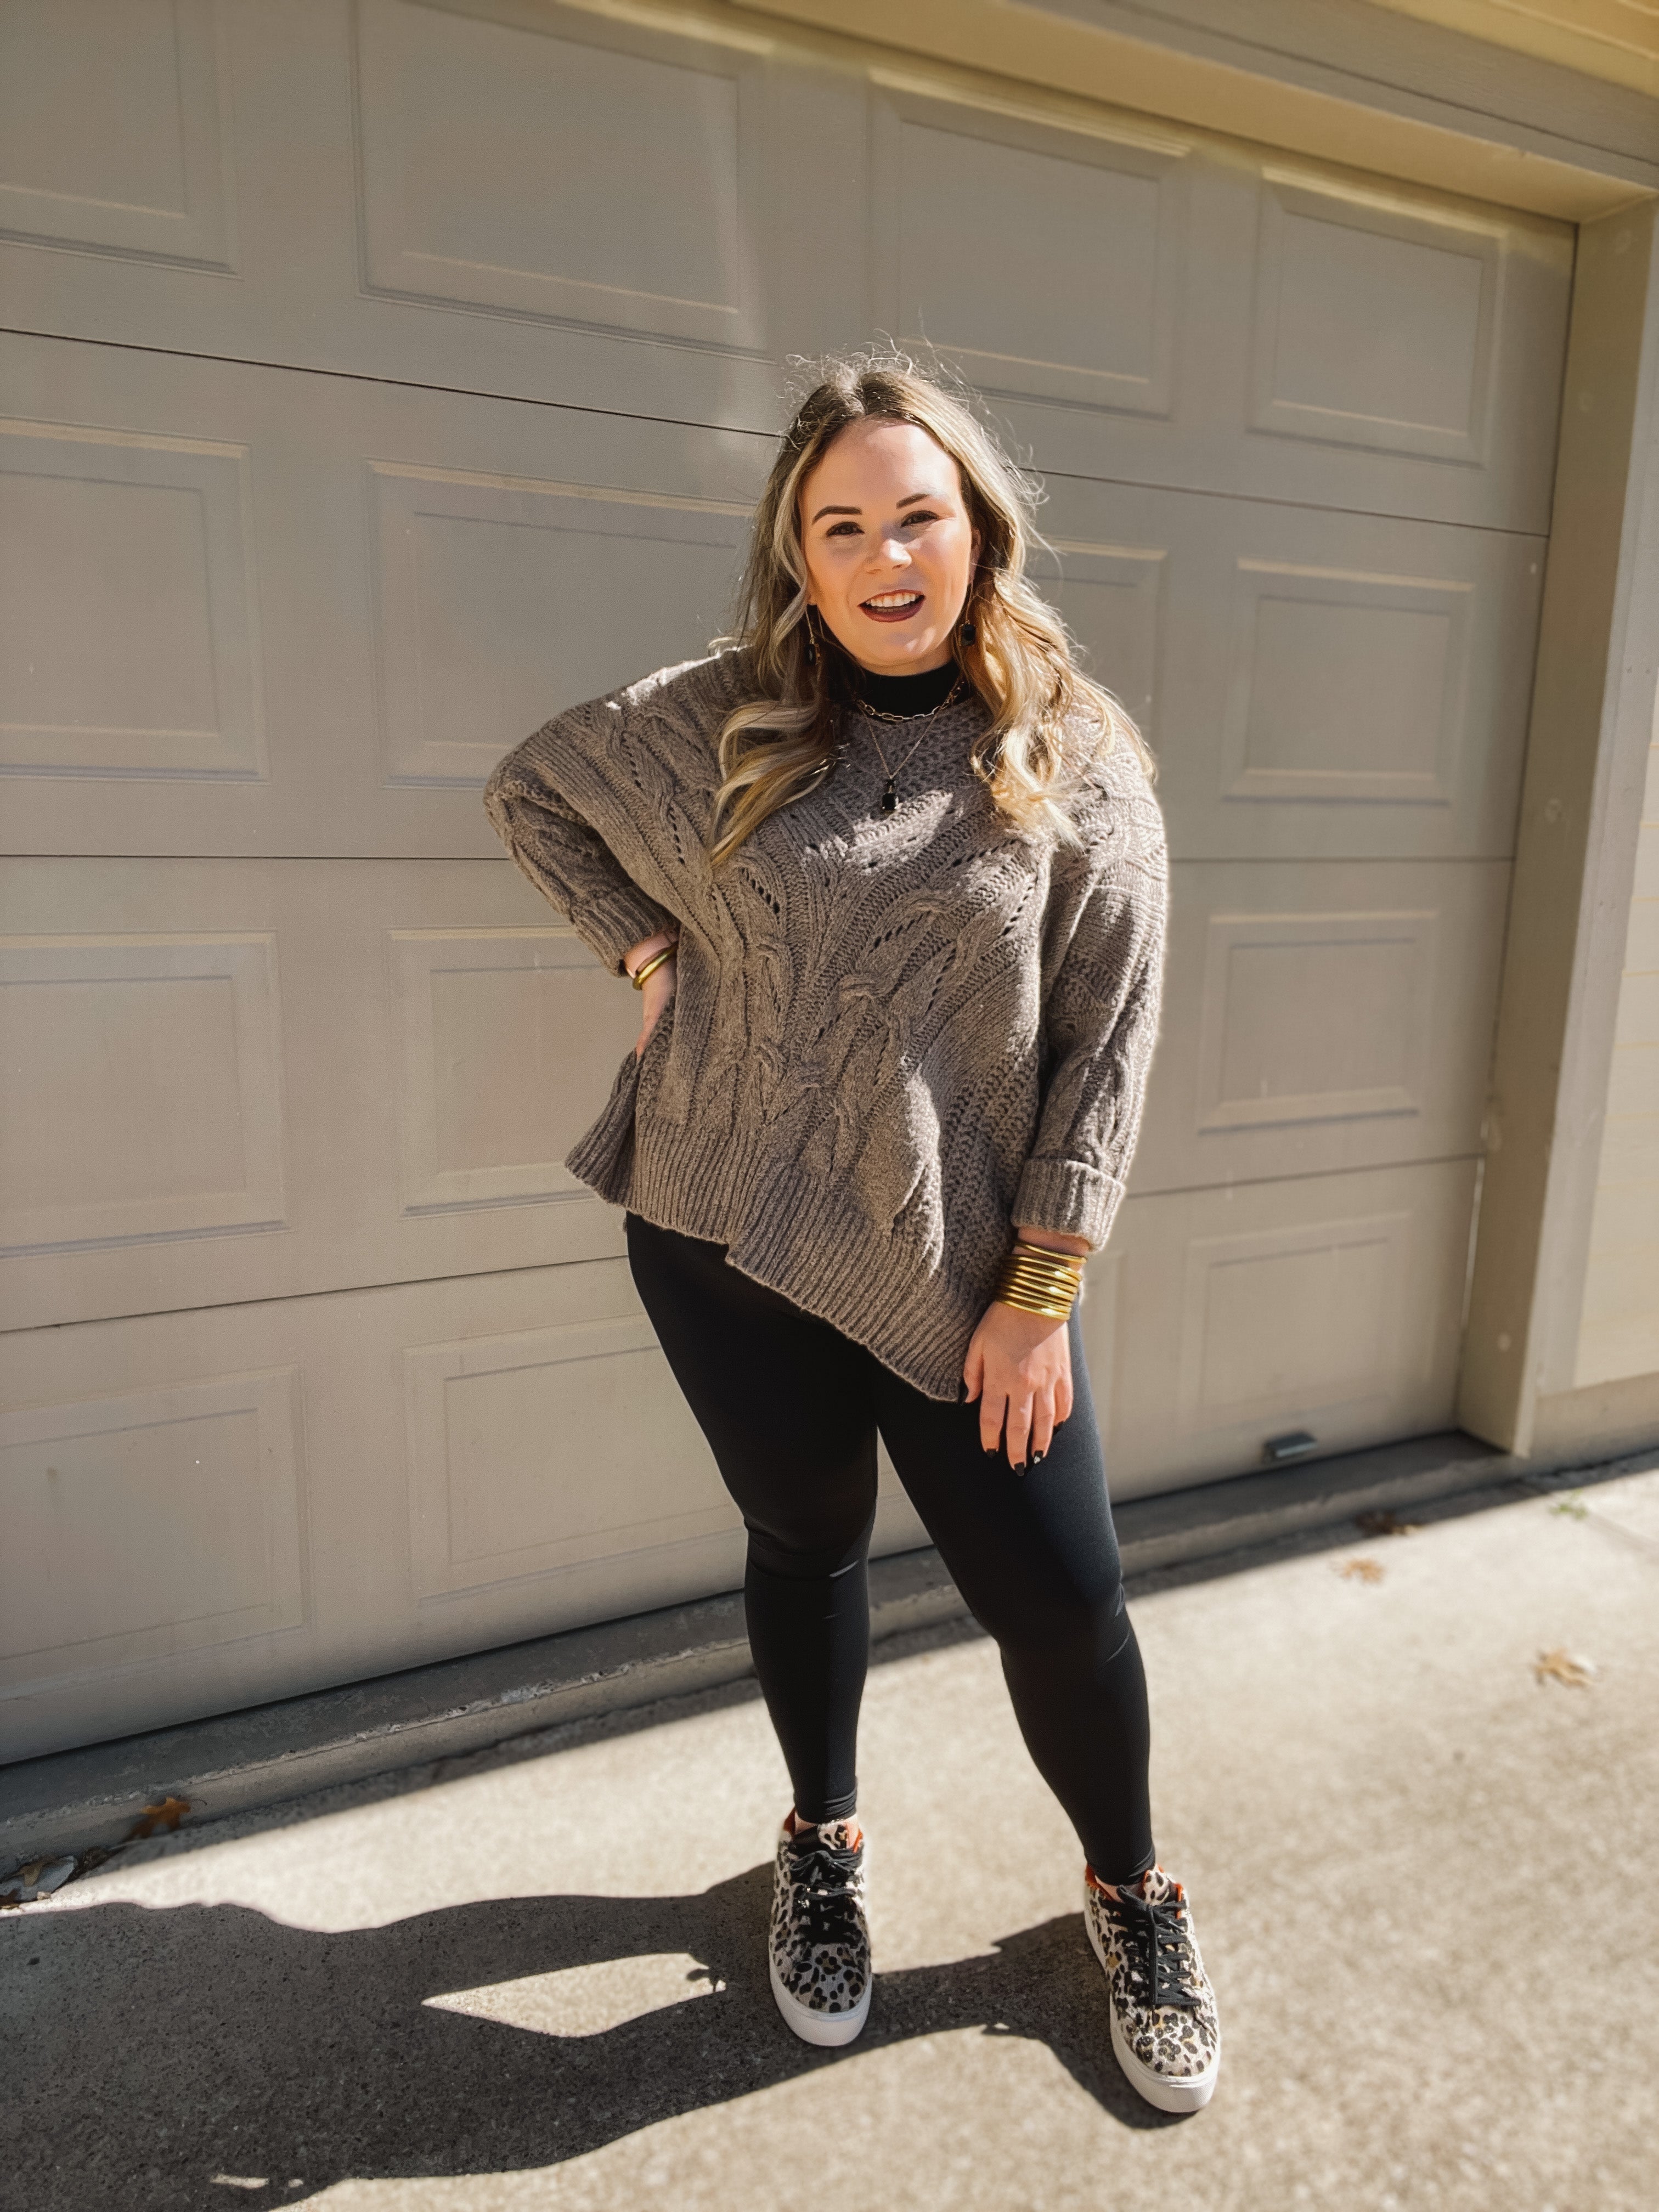 Crisp Morning Air Oversized Dolman 3/4 Sleeve Sweater in Stone Grey - Giddy Up Glamour Boutique